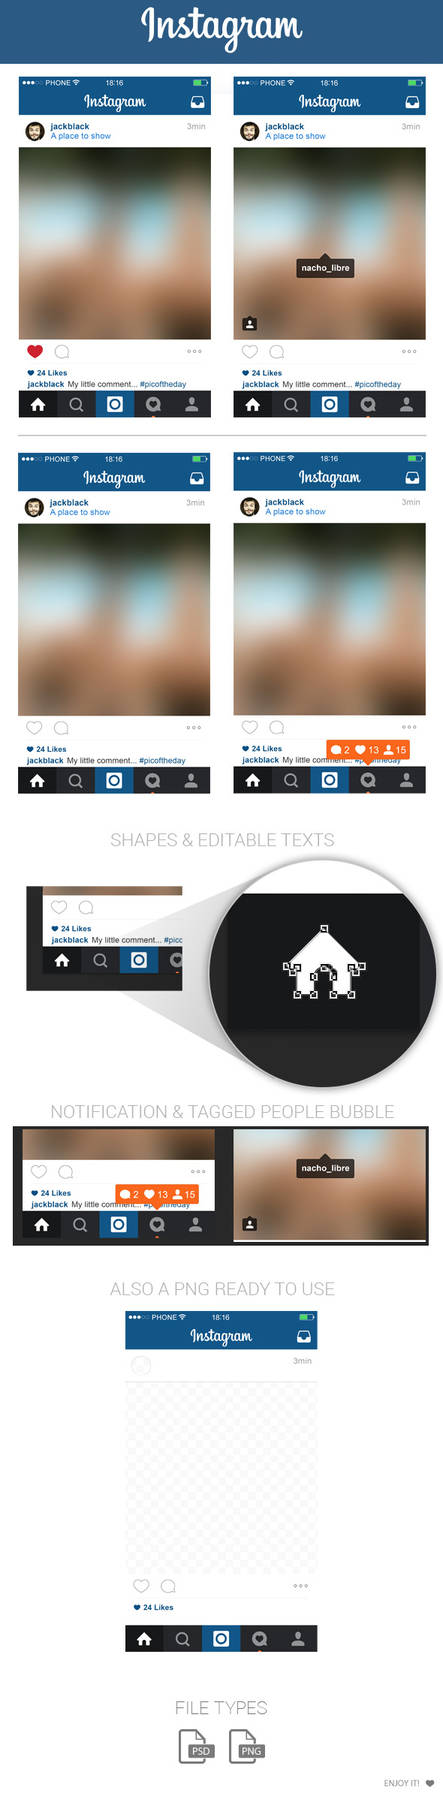 FREE Instagram Home Layout UI PSD May 2015